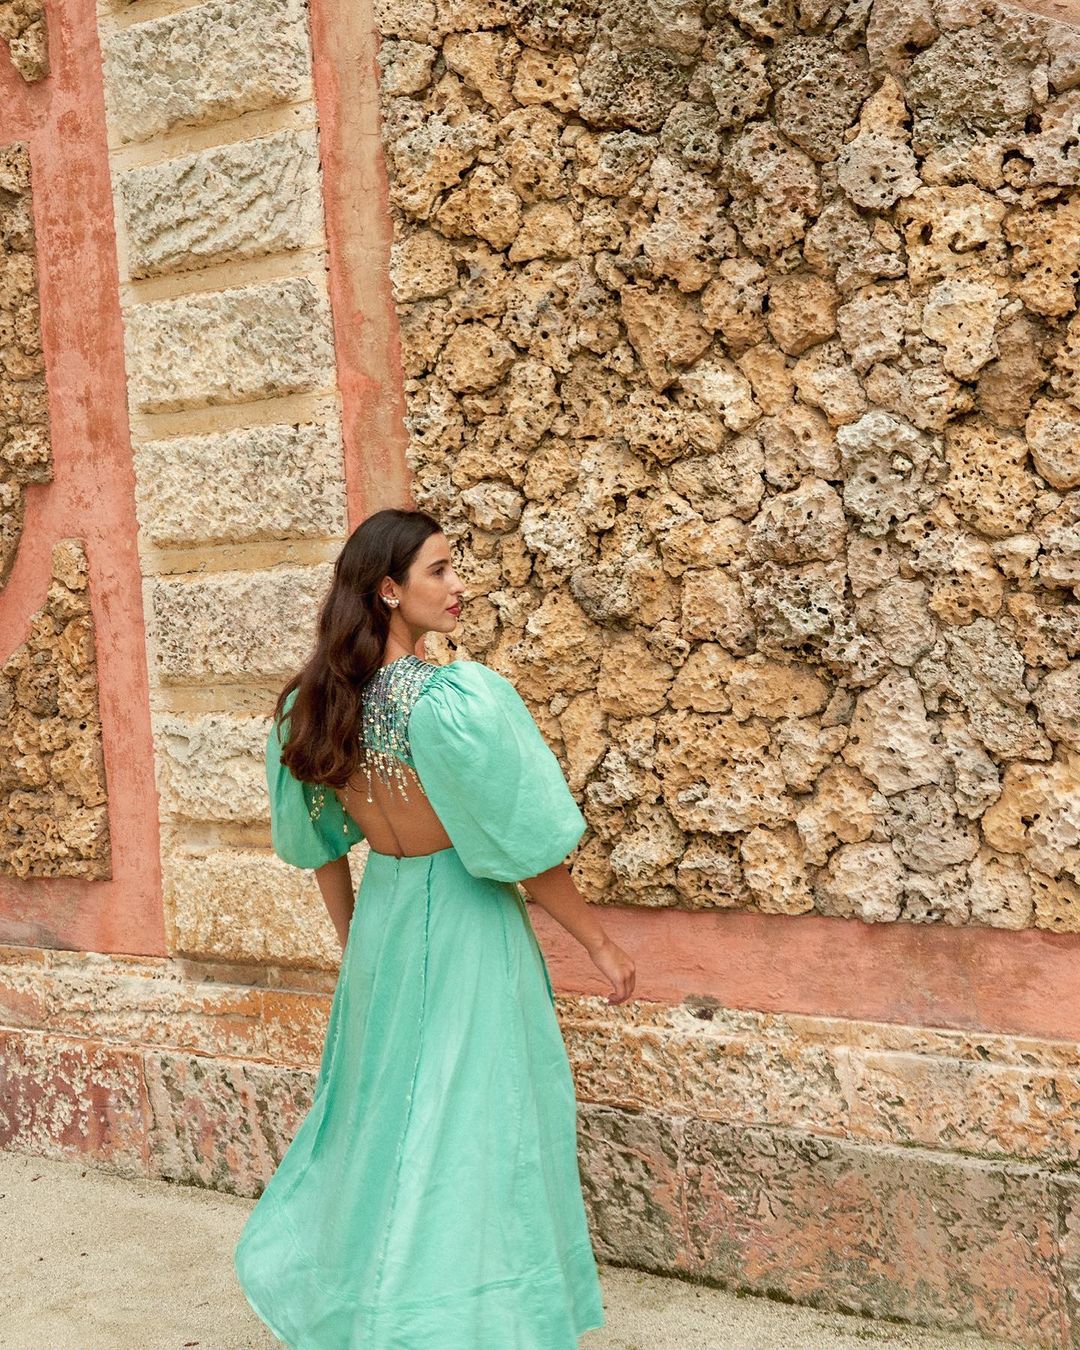 Wedding guest dresses: Bettina Looney wears an embellished turquoise dress